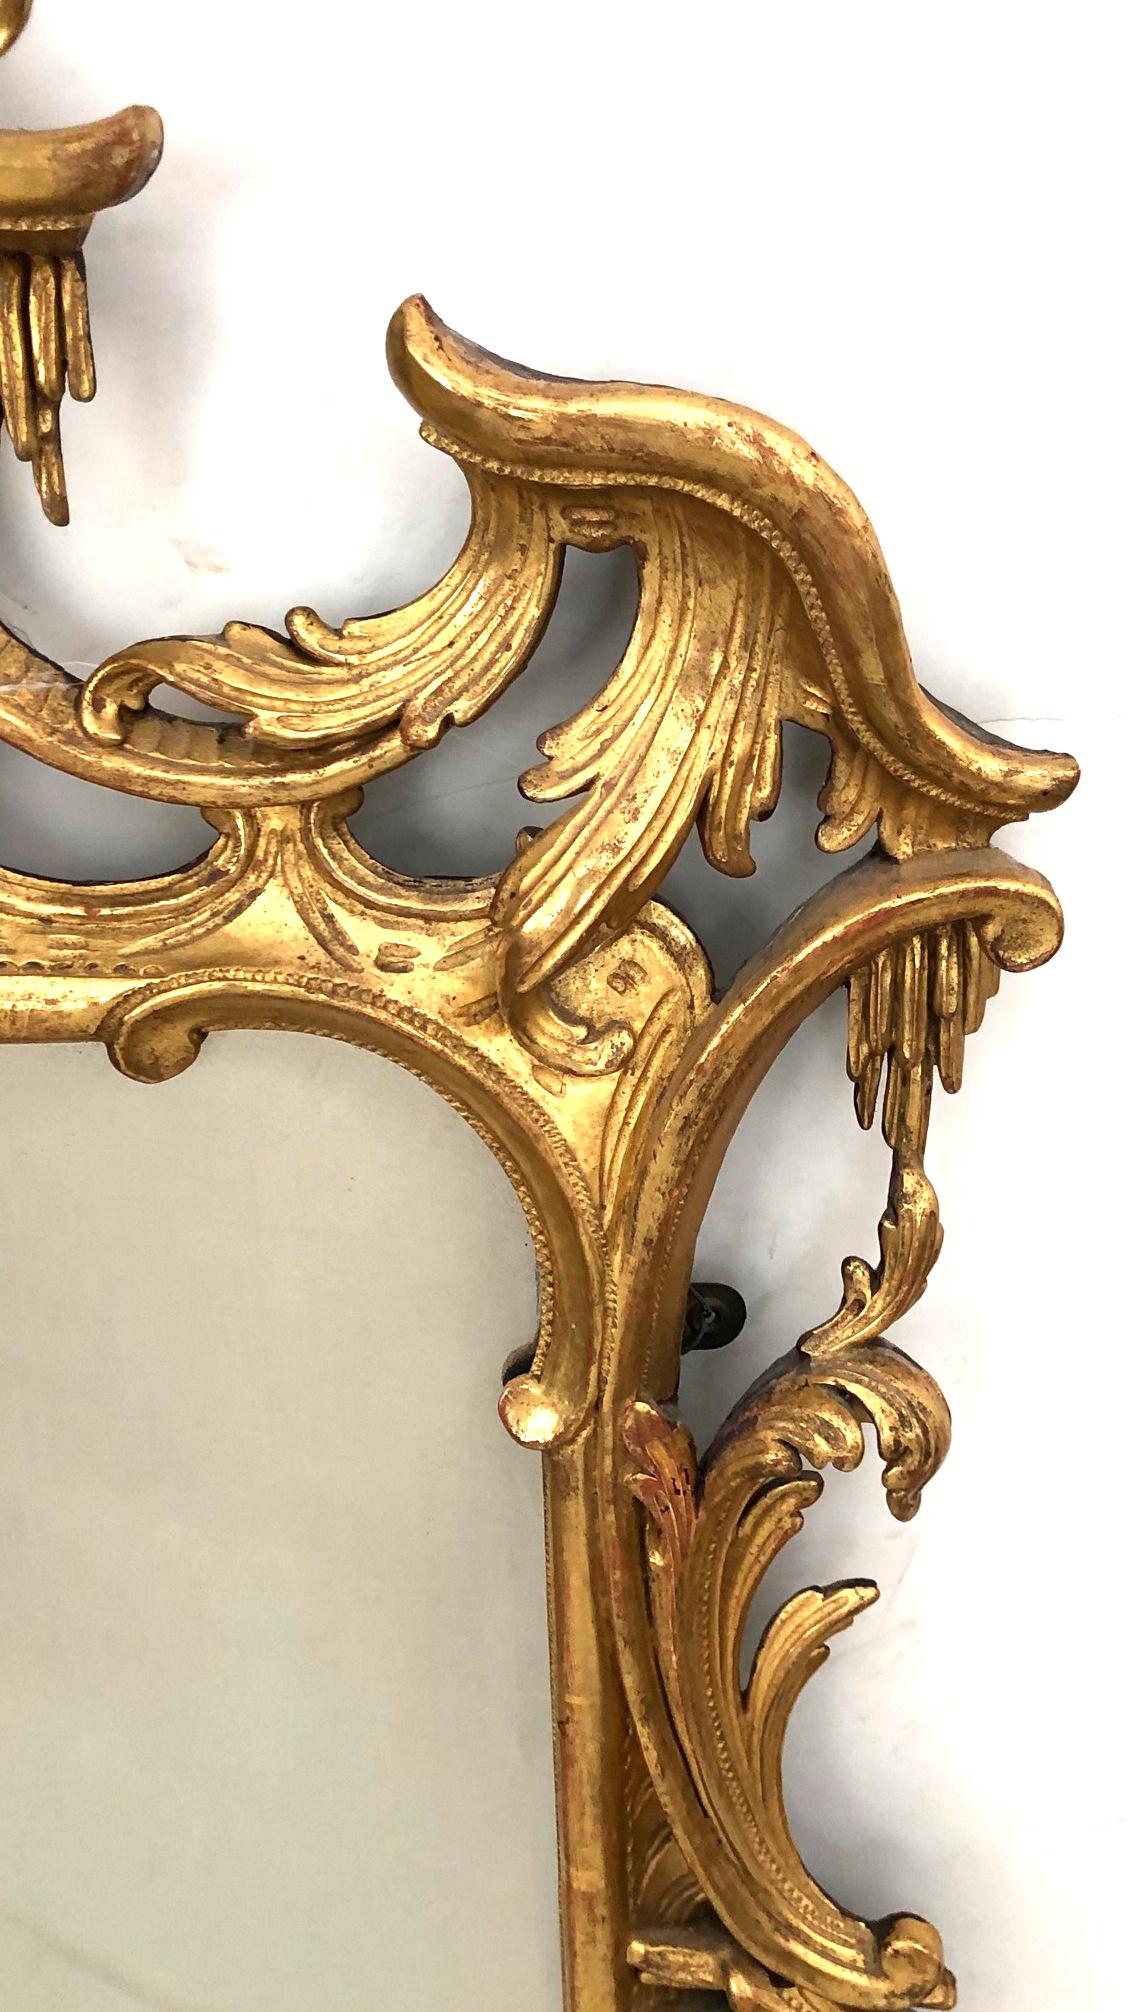 19th Century English Chippendale Style Carved Giltwood Mirror in the Chinese Taste For Sale